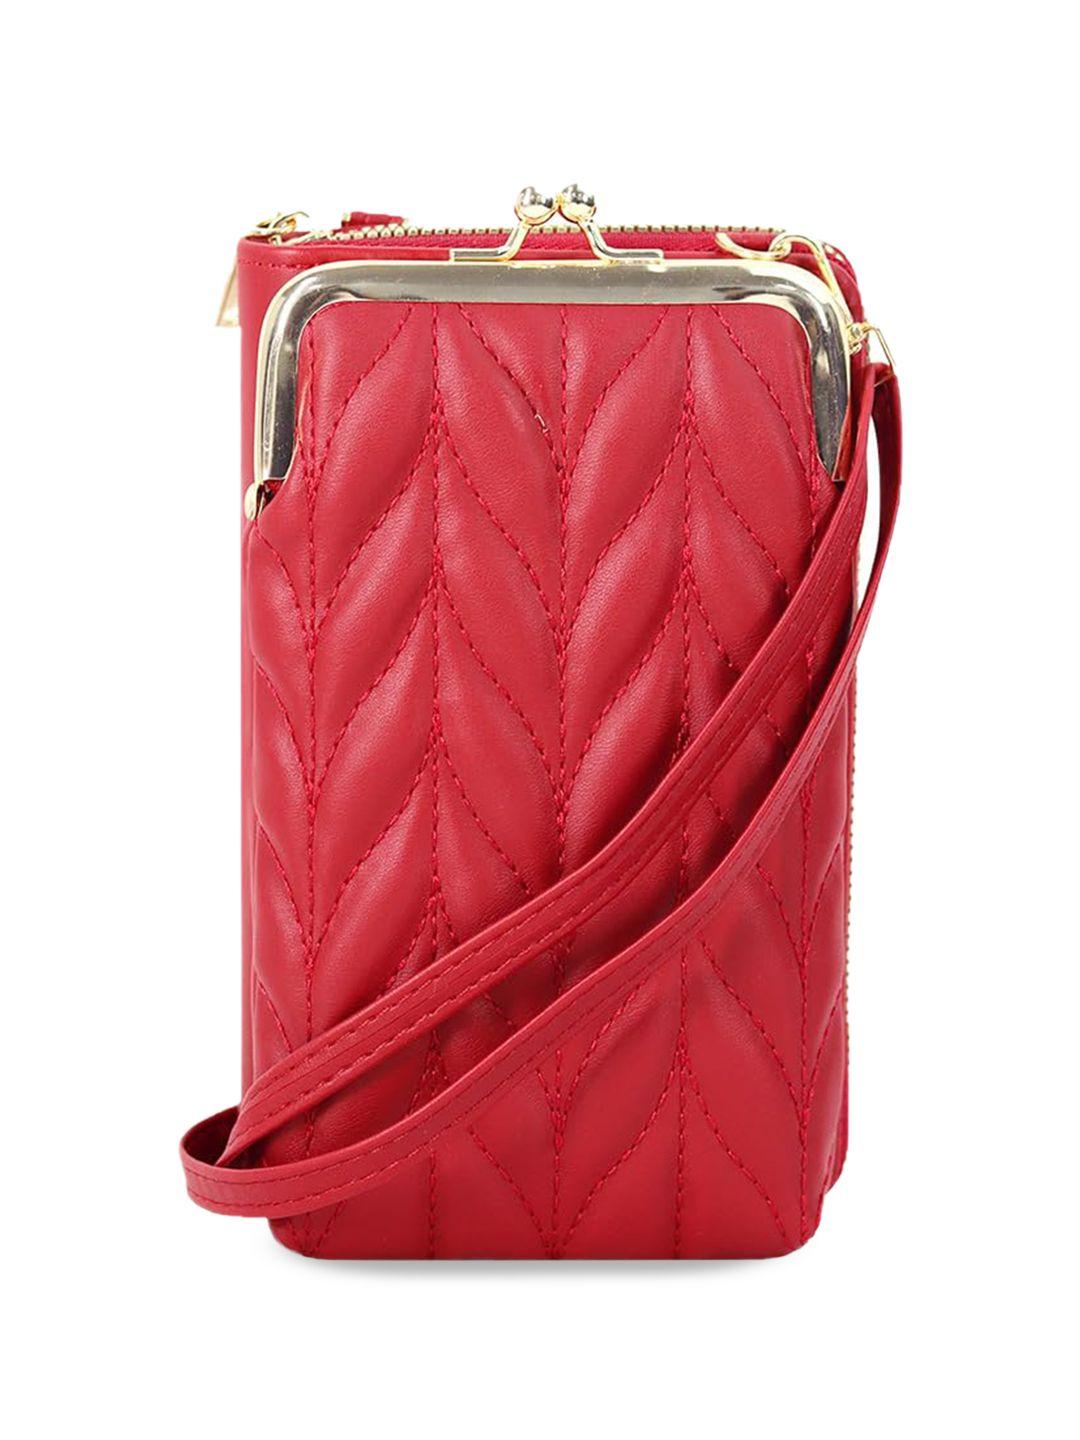 syga-leather-structured-sling-bag-with-quilted